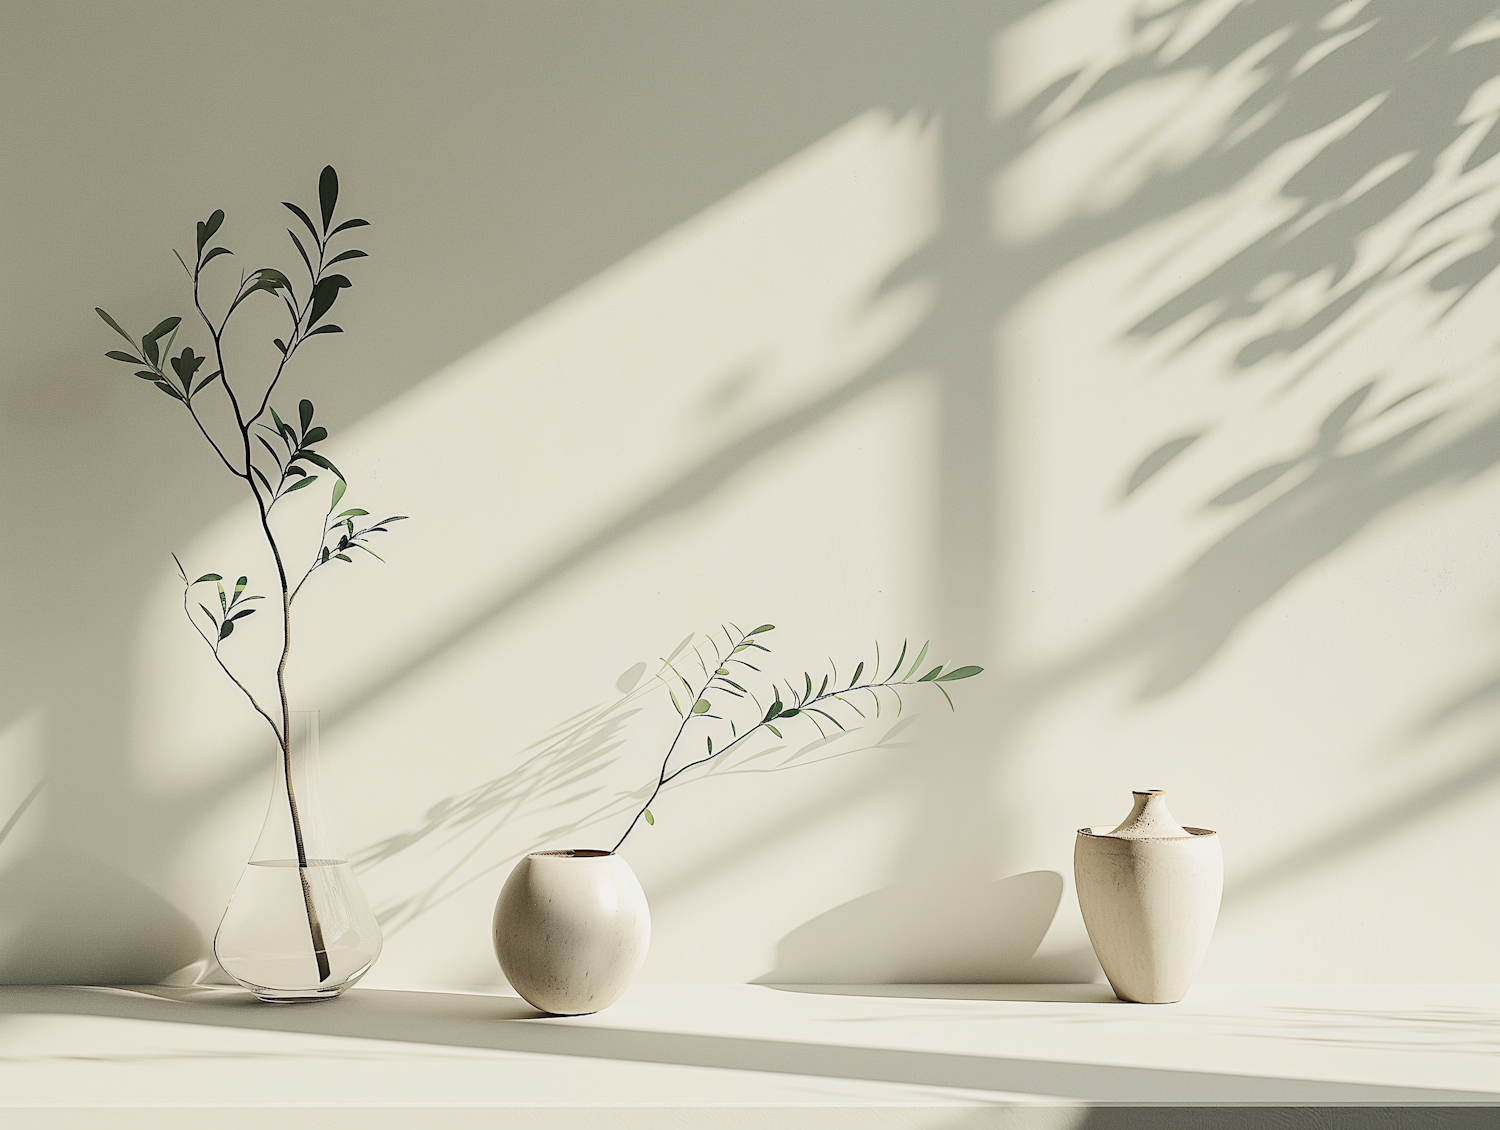 Minimalist Vases with Greenery and Shadows